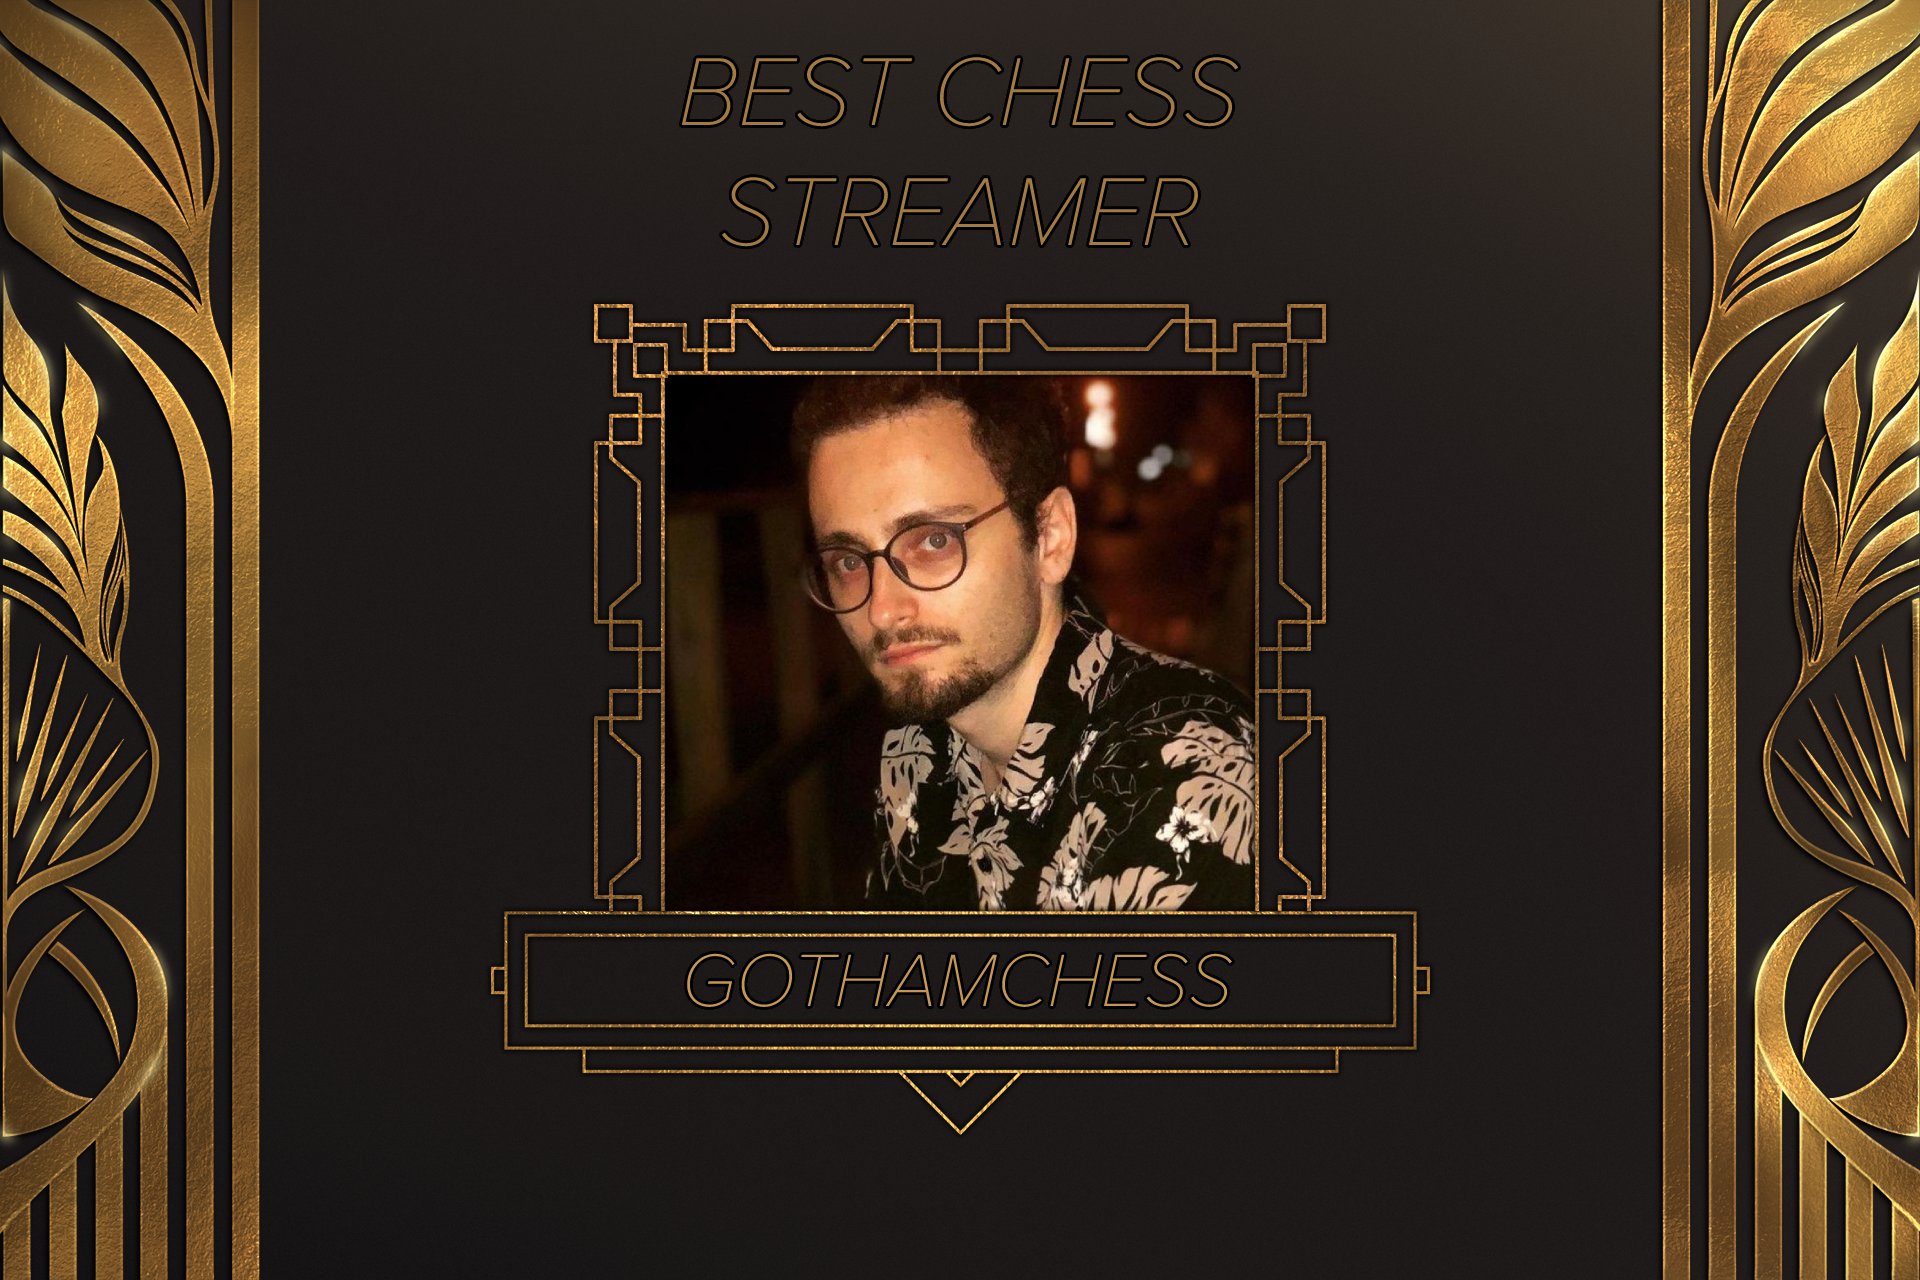 GothamChess calls out Chess streamers for not supporting him while talking  to QTCinderella